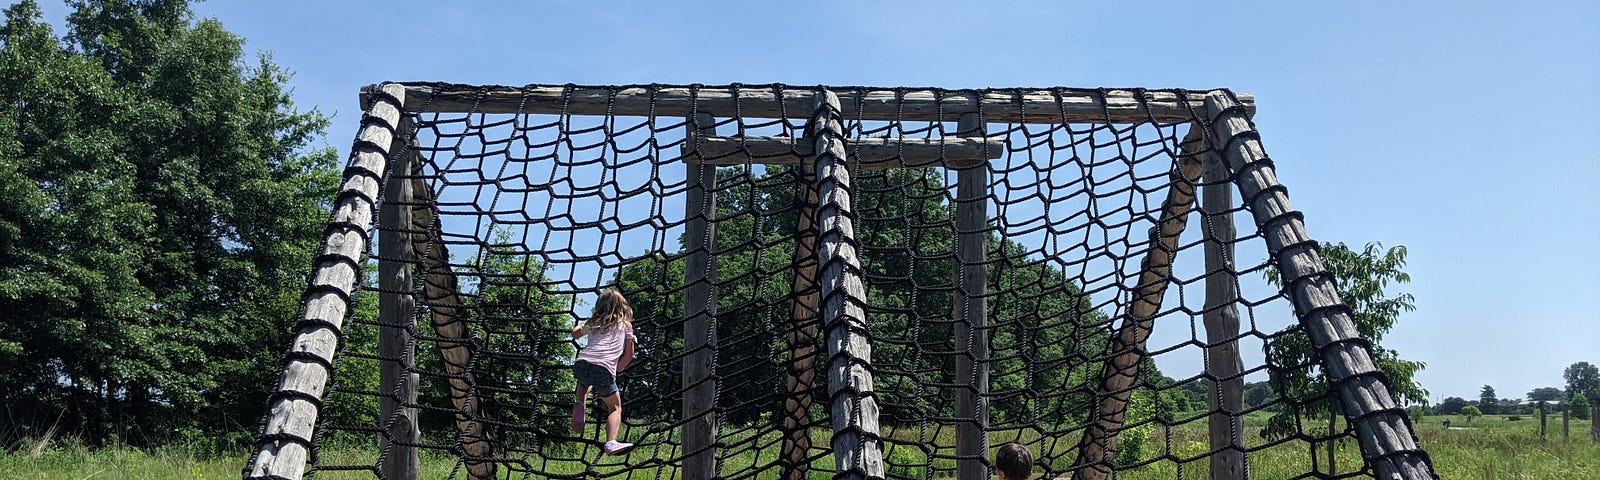 Boy and girl climbing up a rope wall at a challenge course outdoors.